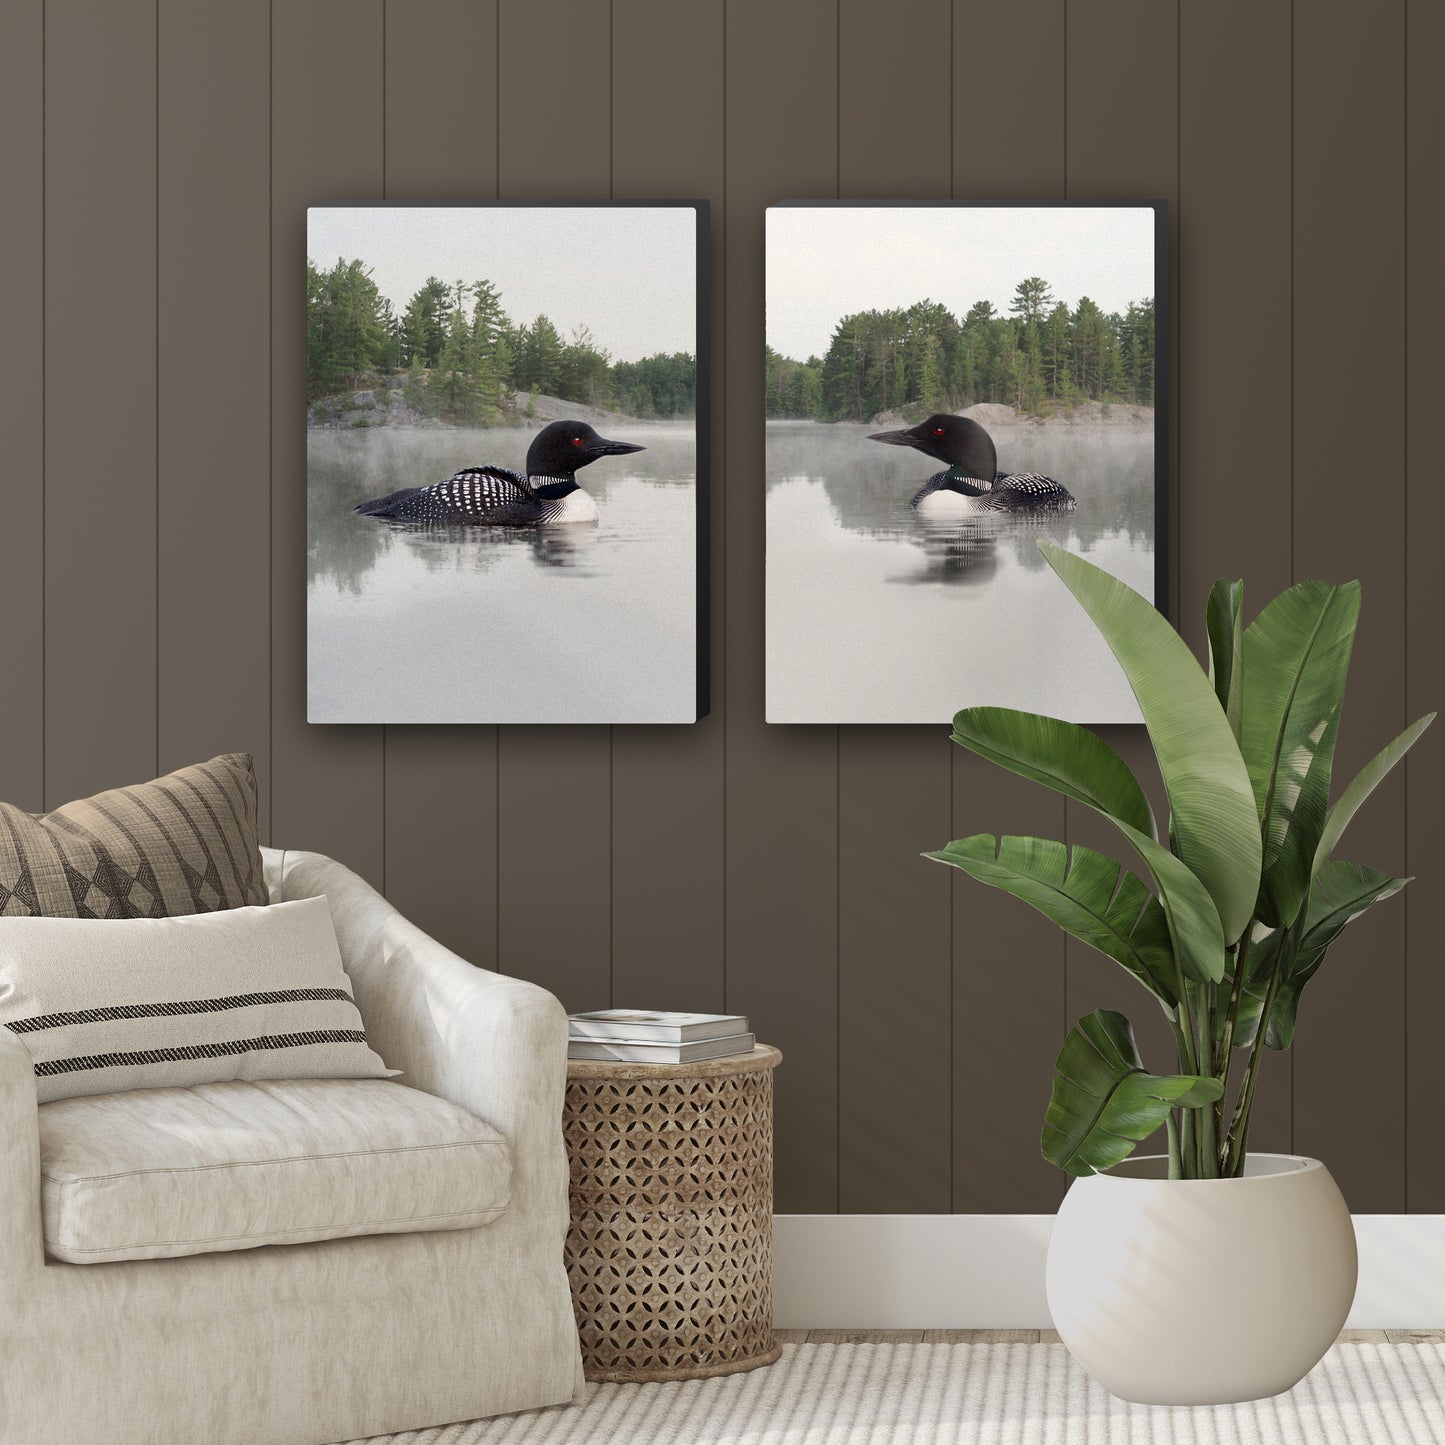 Set of 2 Loon Wrapped Canvas Prints